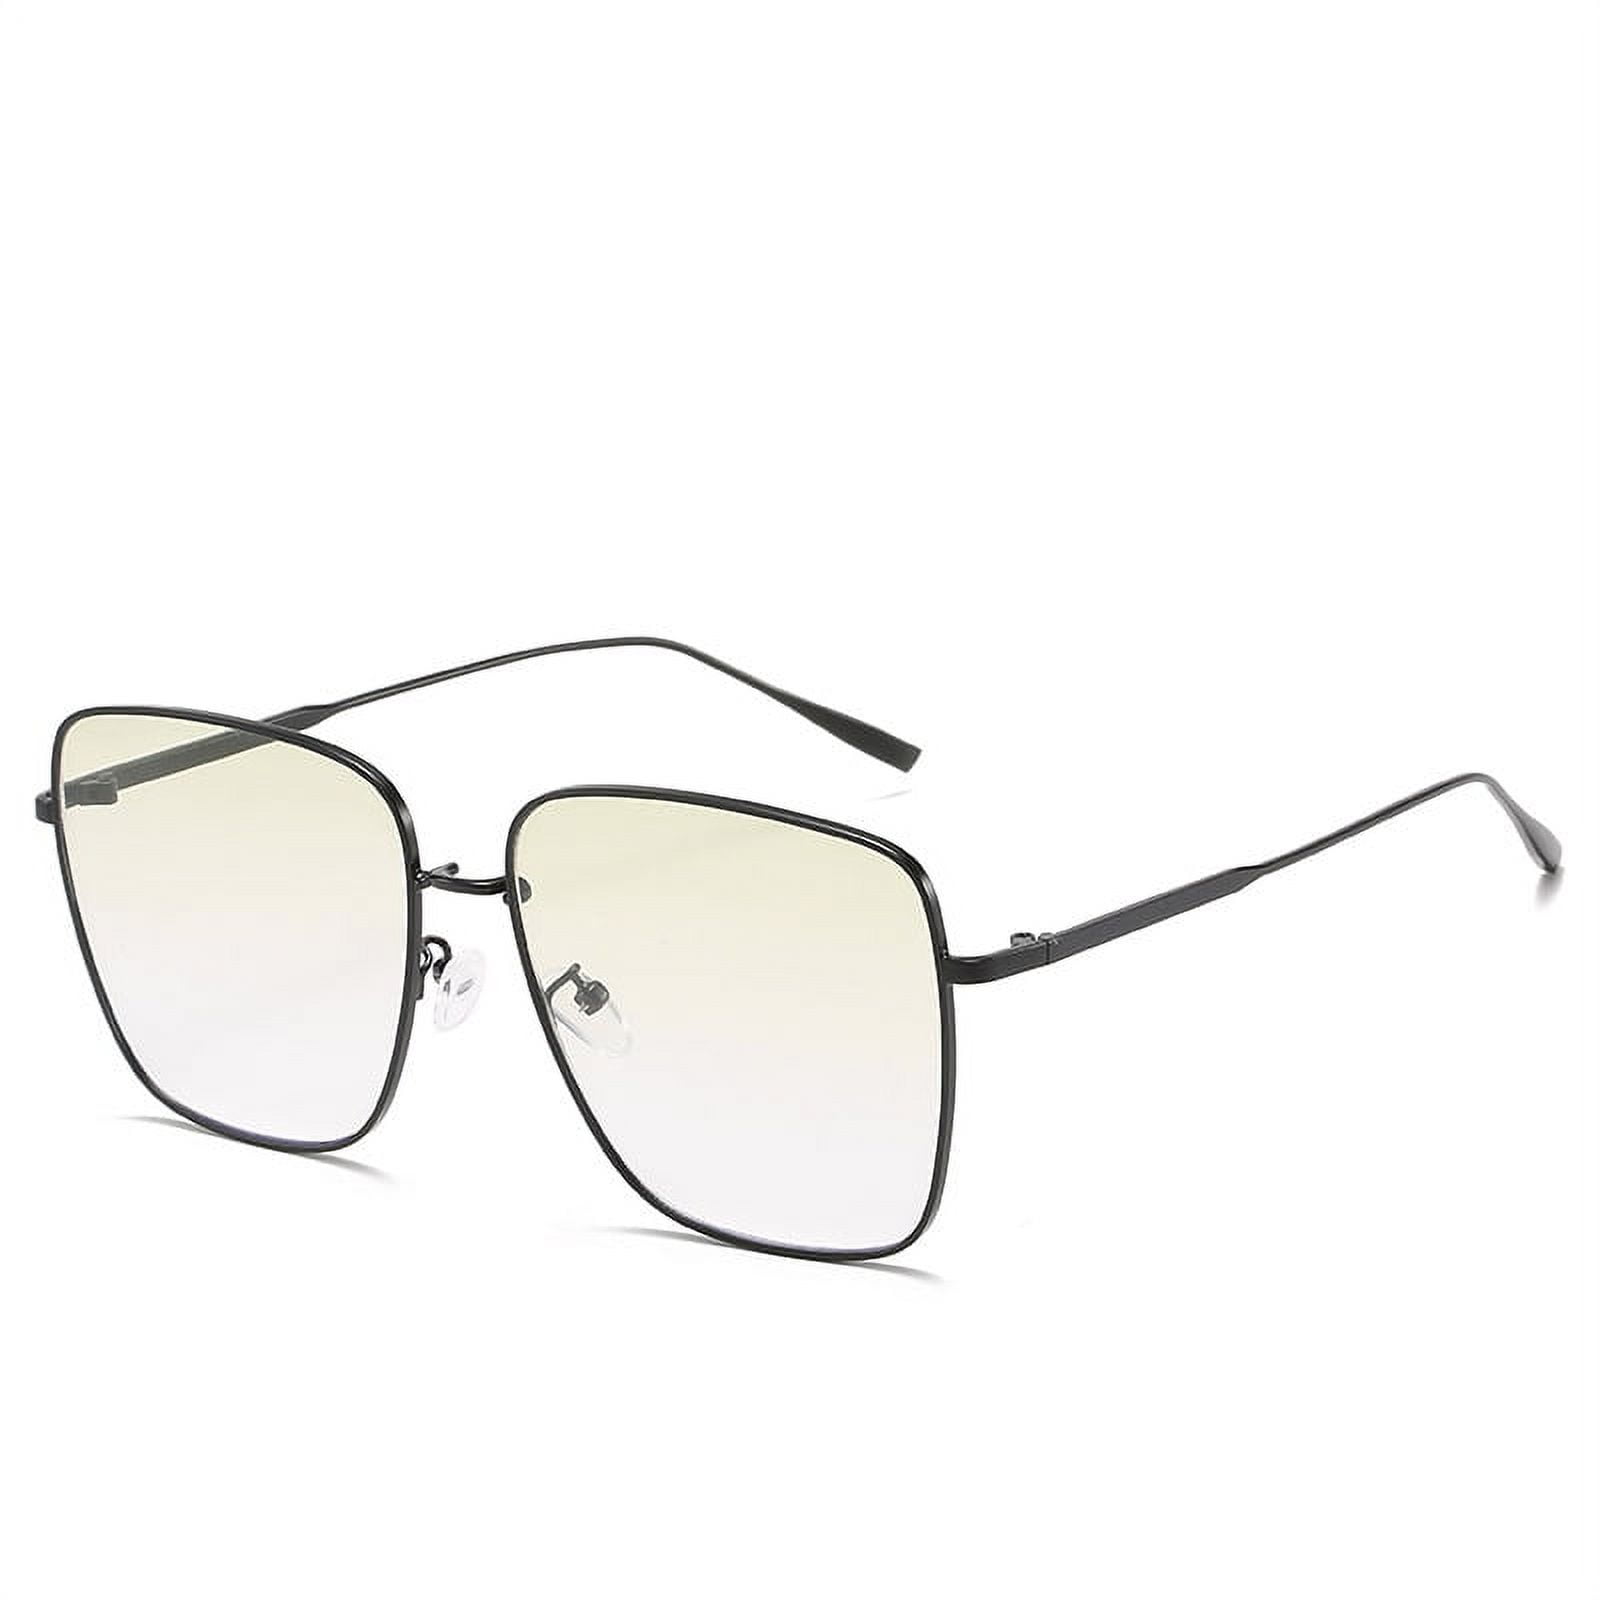 Metal Square Silver Sunglasses For Men Black/Gold/Dark Grey UV400  Protection Includes Box From Jenlsky, $48.32